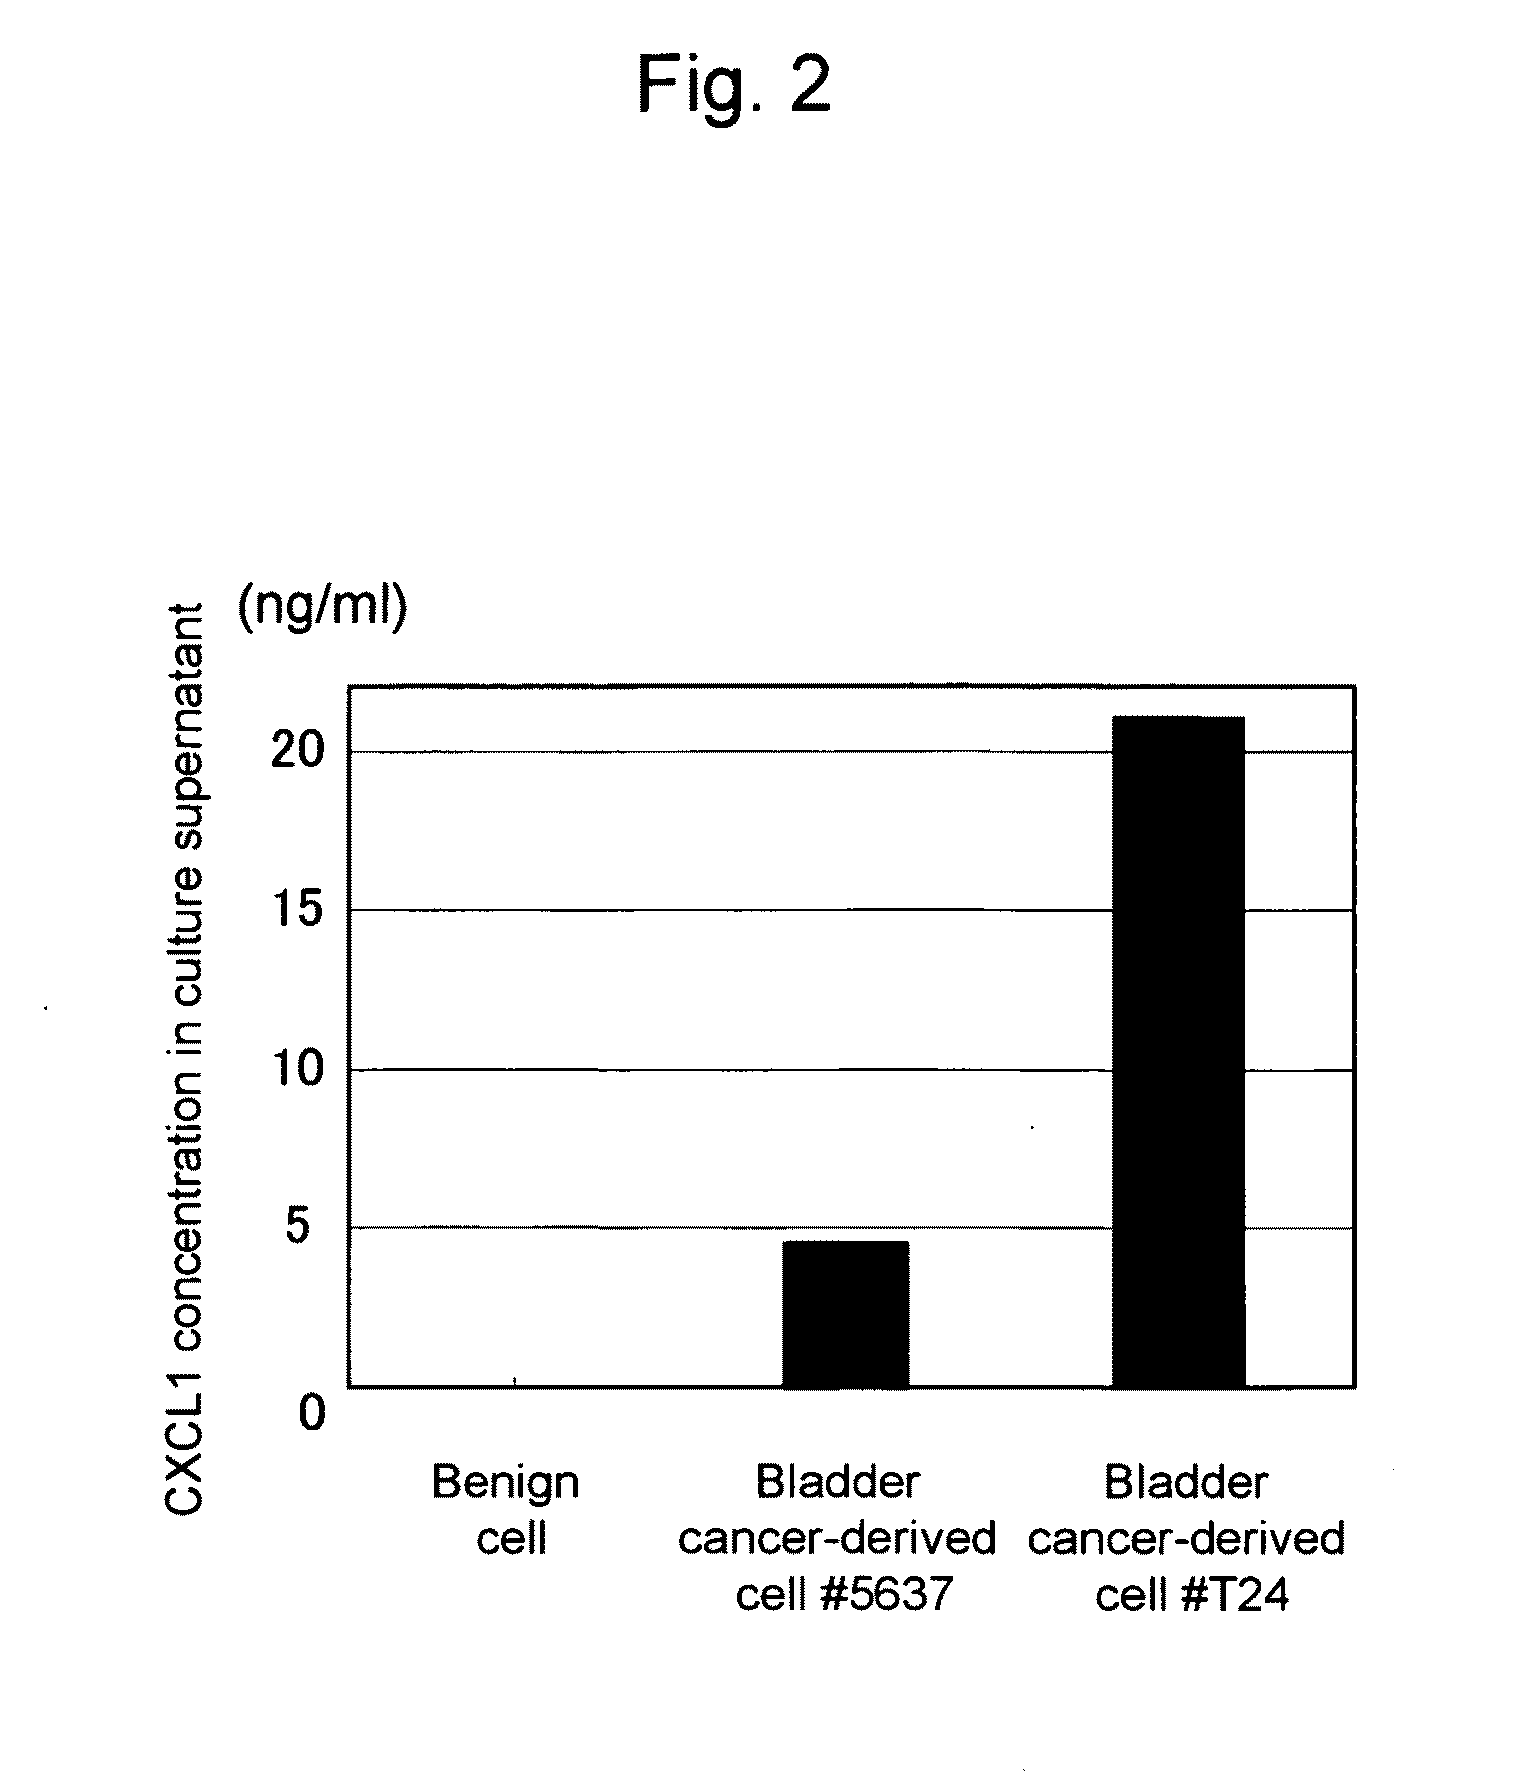 Kit and method for detecting urothelial cancer